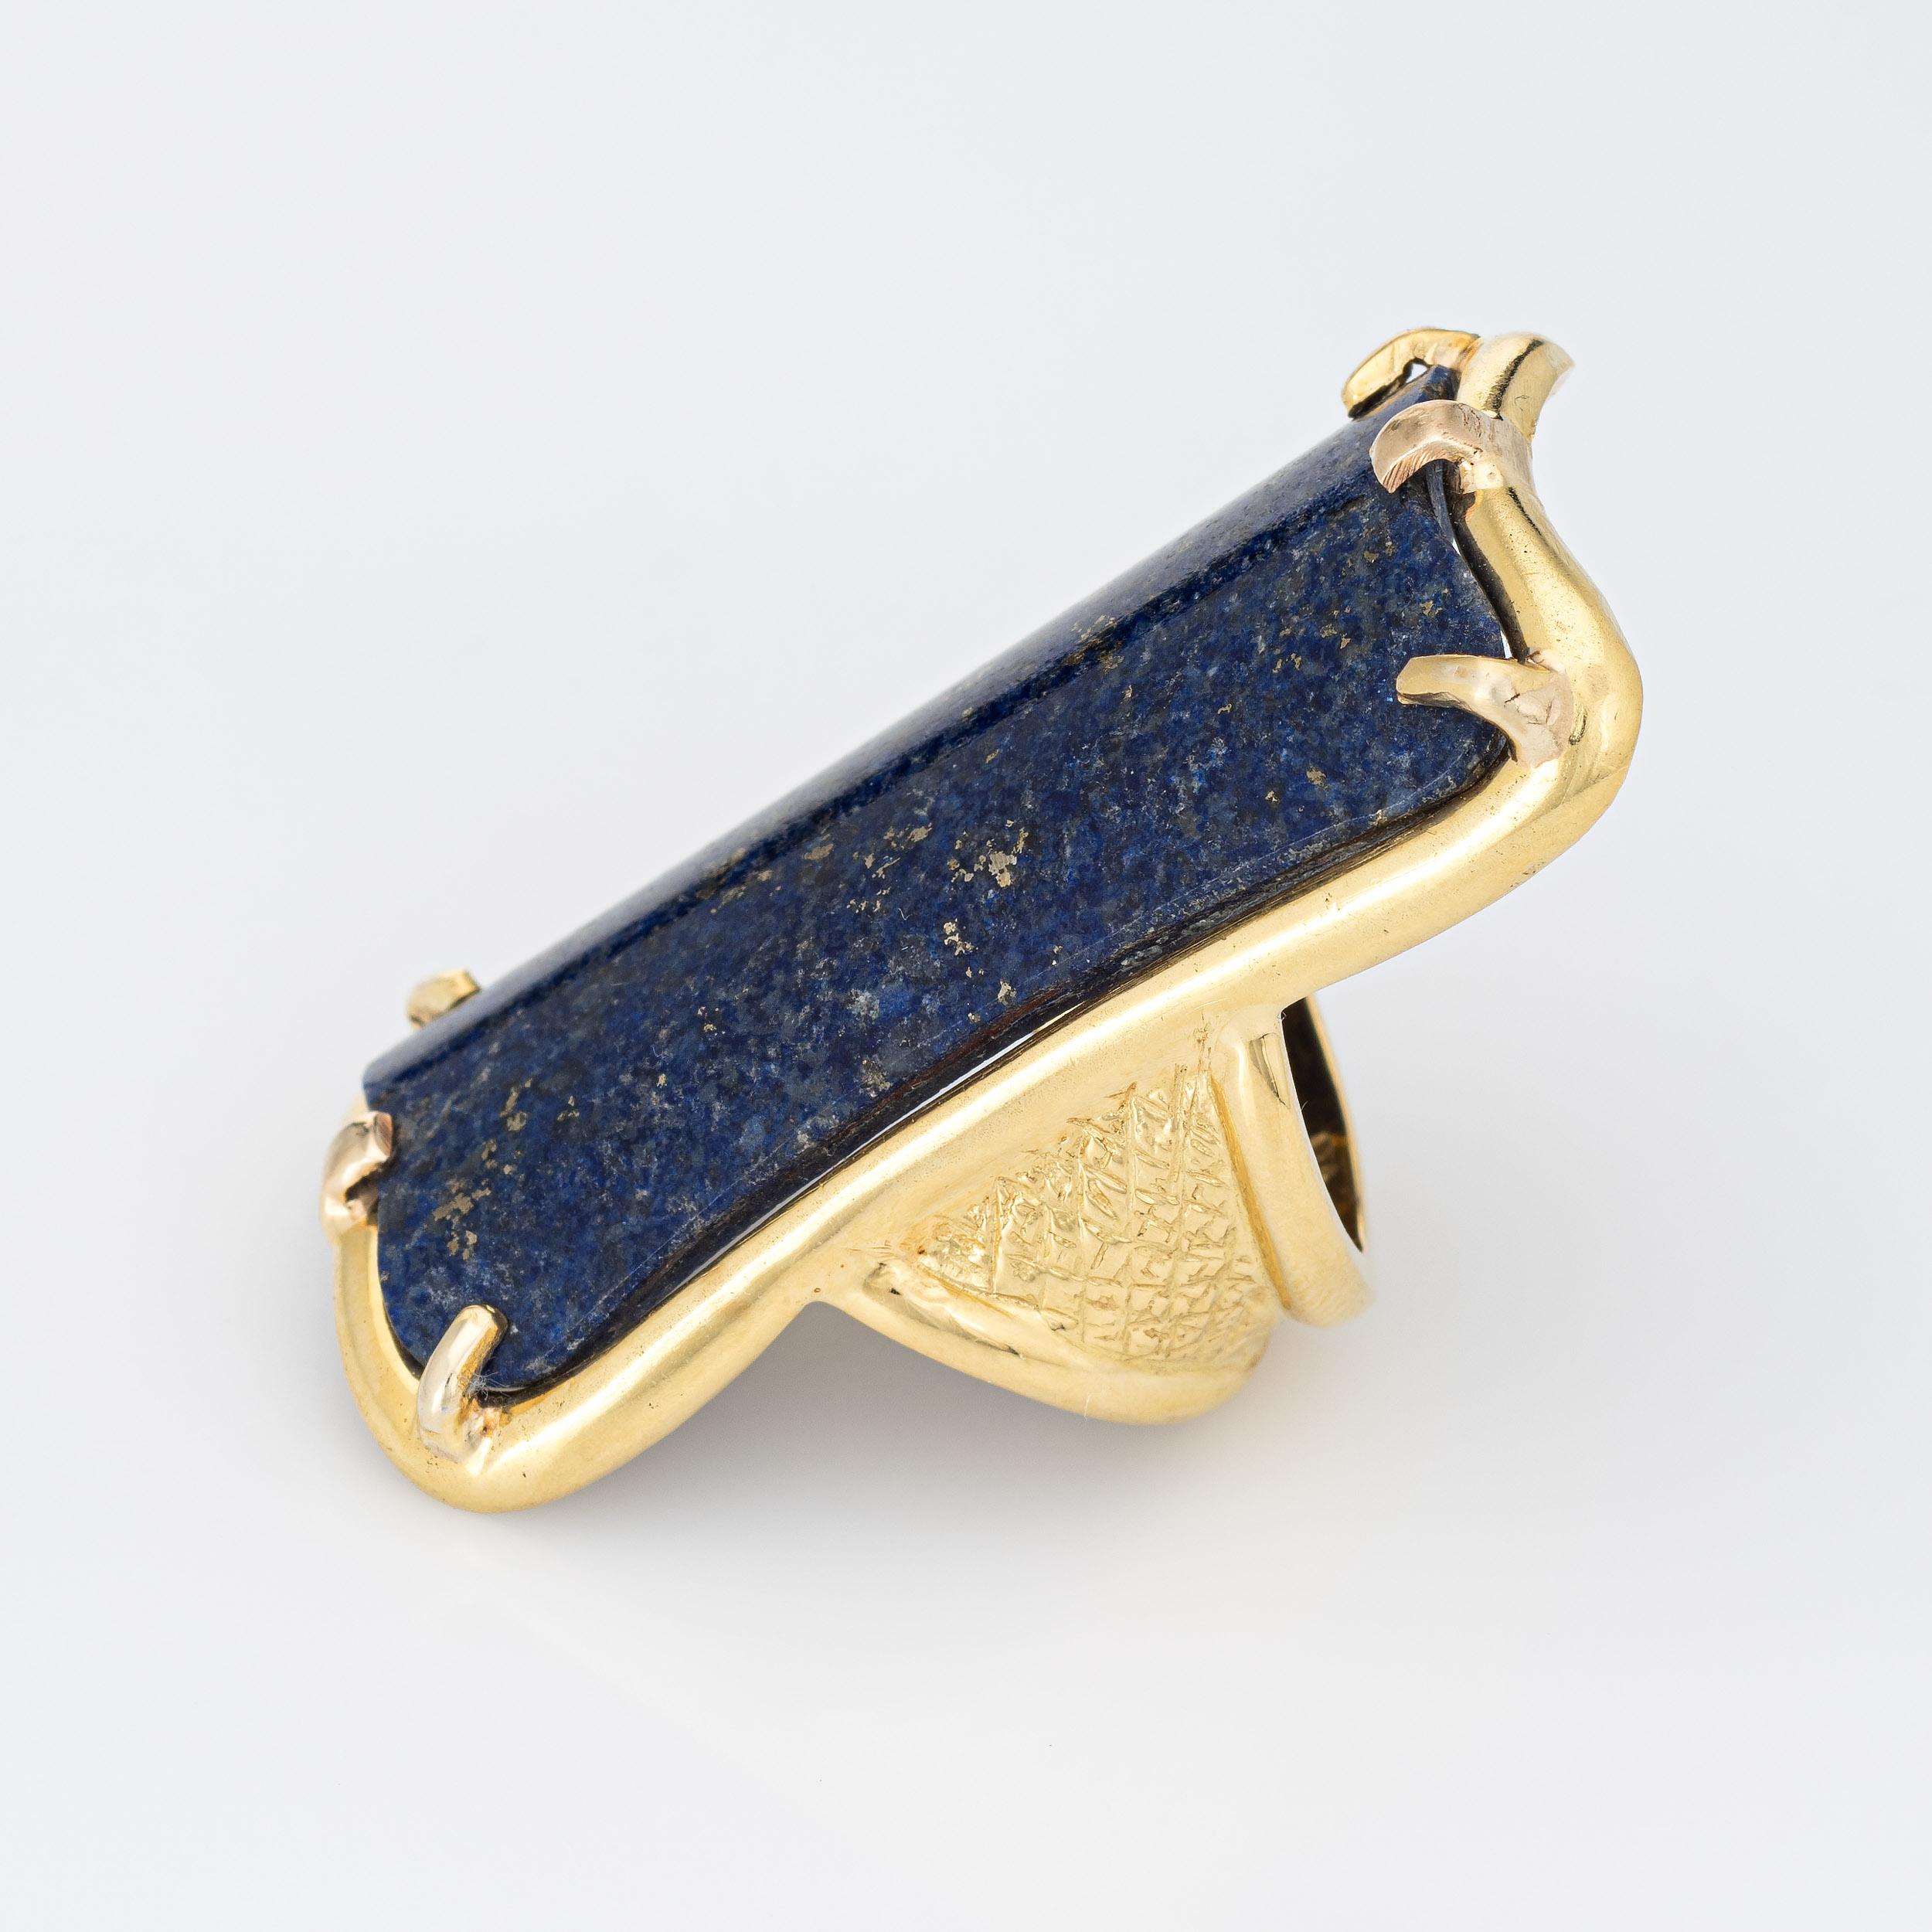 Modern Huge Lapis Lazuli Ring Vintage 18k Yellow Gold Cocktail Jewelry Estate For Sale